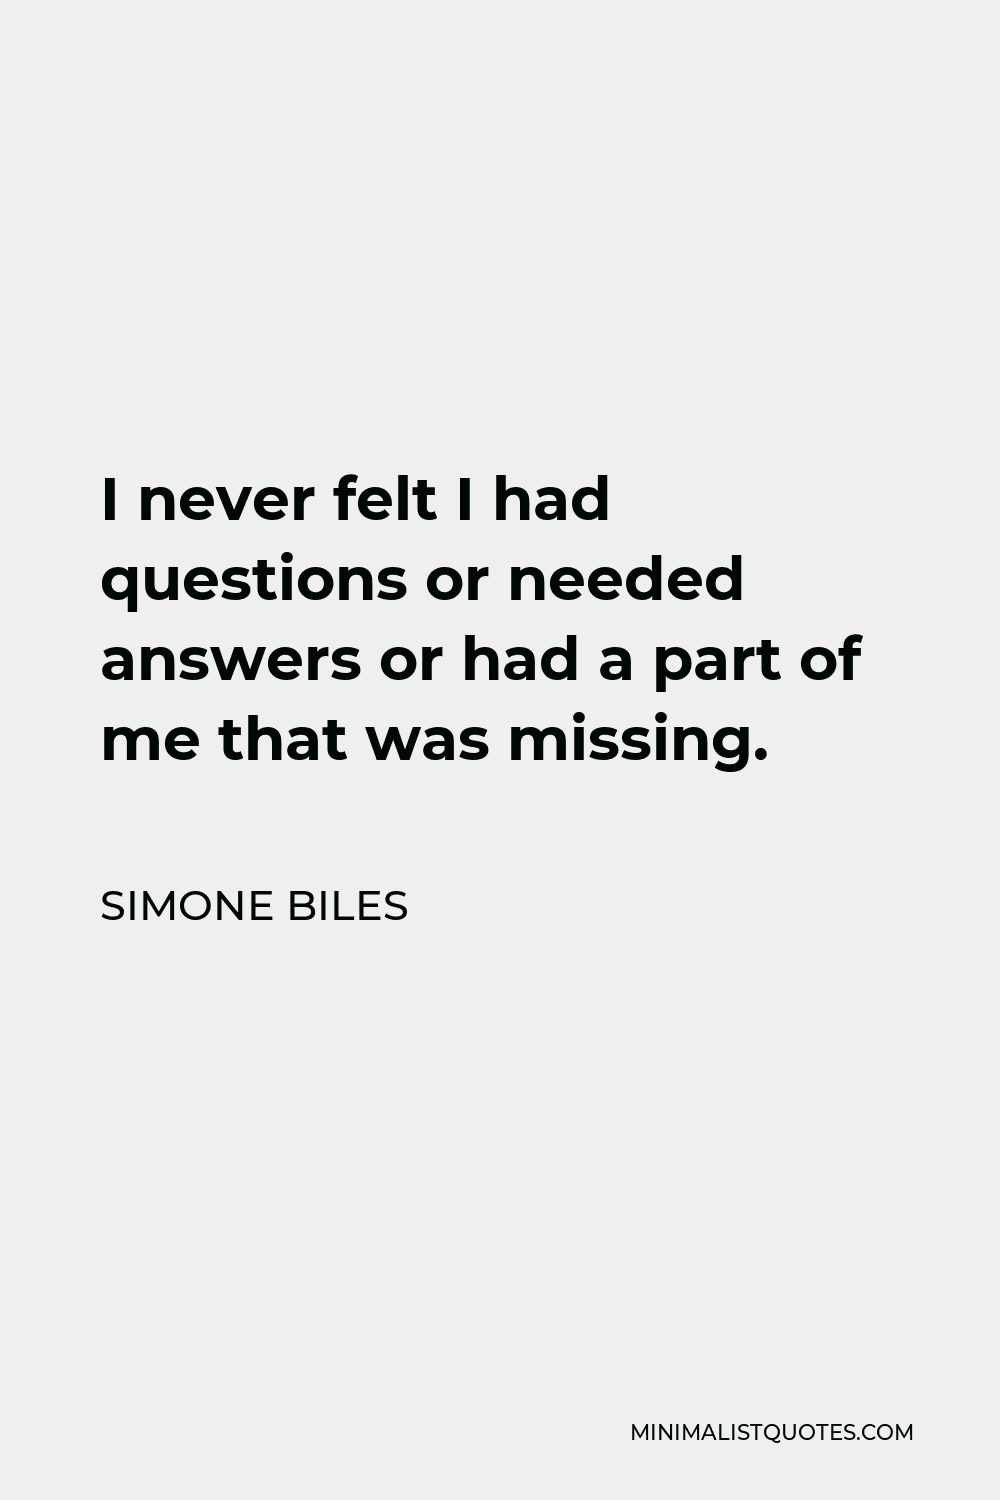 Simone Biles Quote - I never felt I had questions or needed answers or had a part of me that was missing.